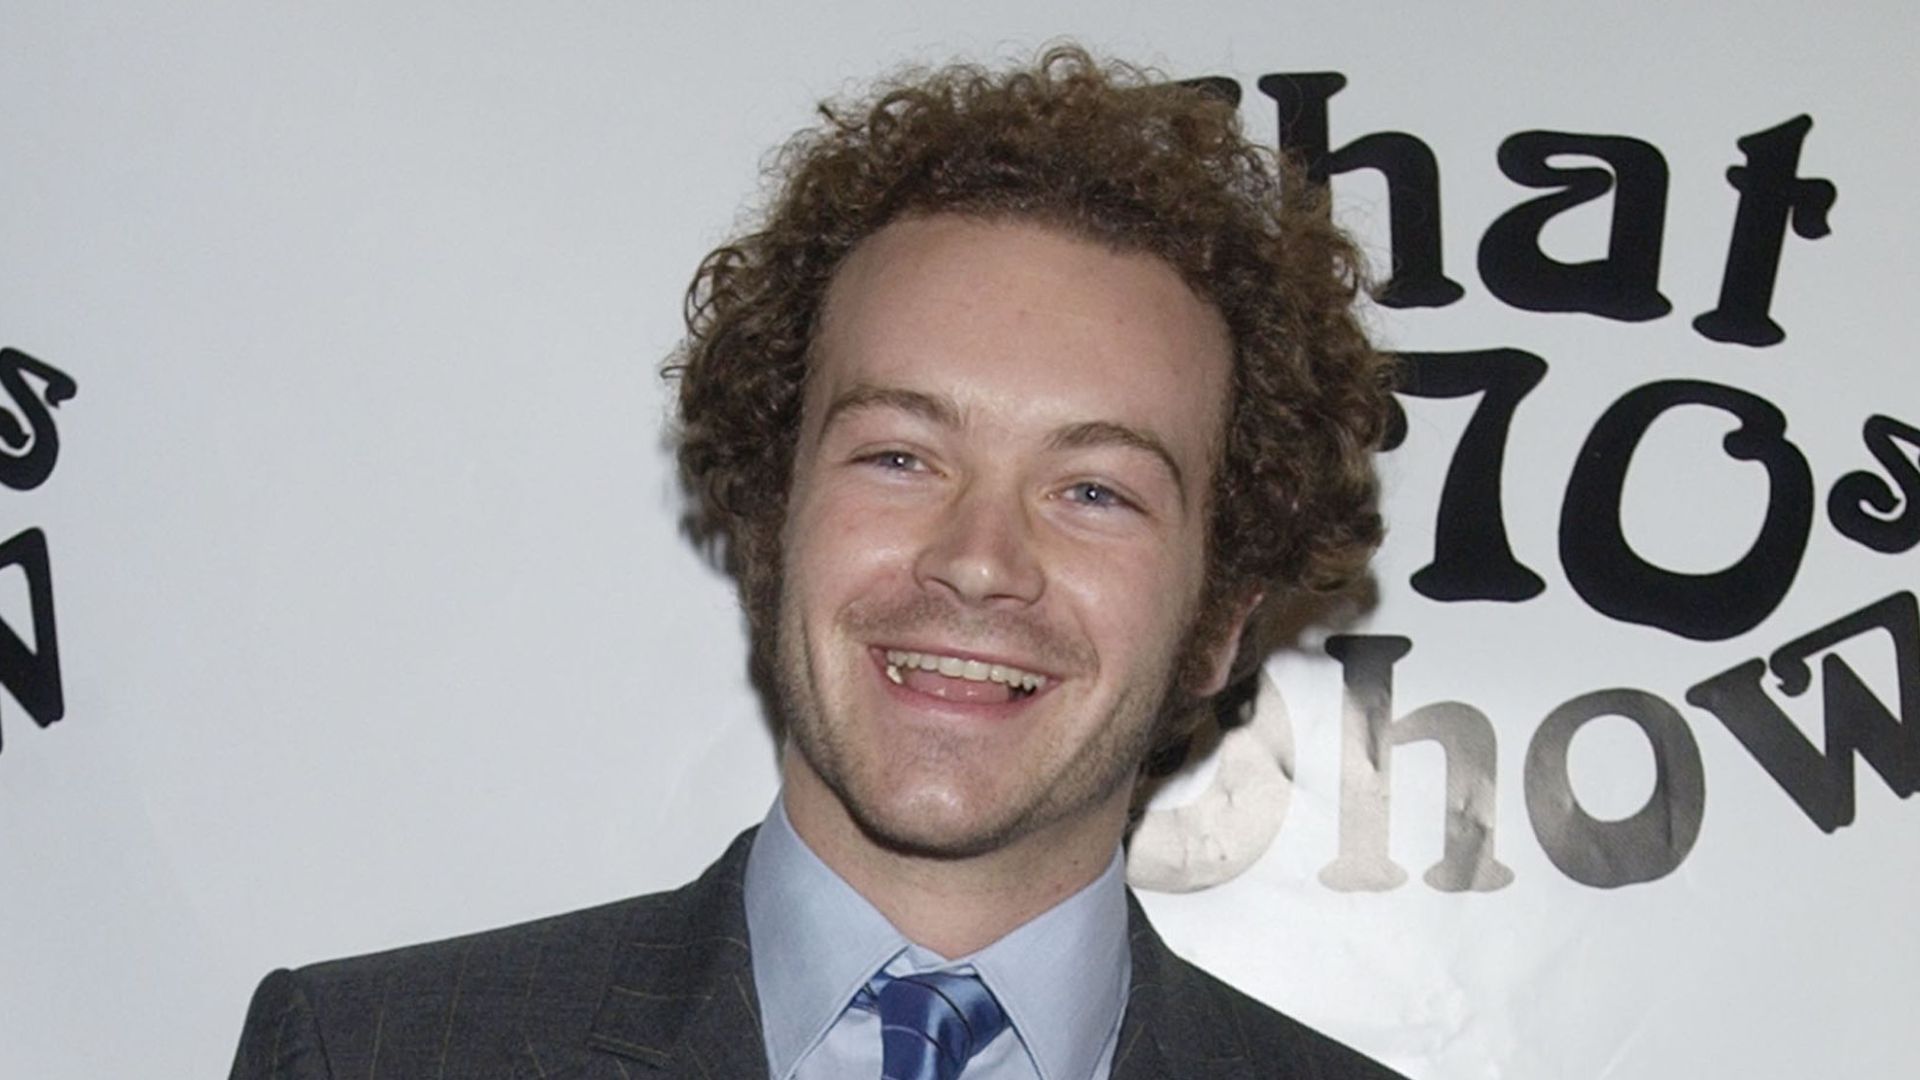 Danny Masterson With Smiling Face 